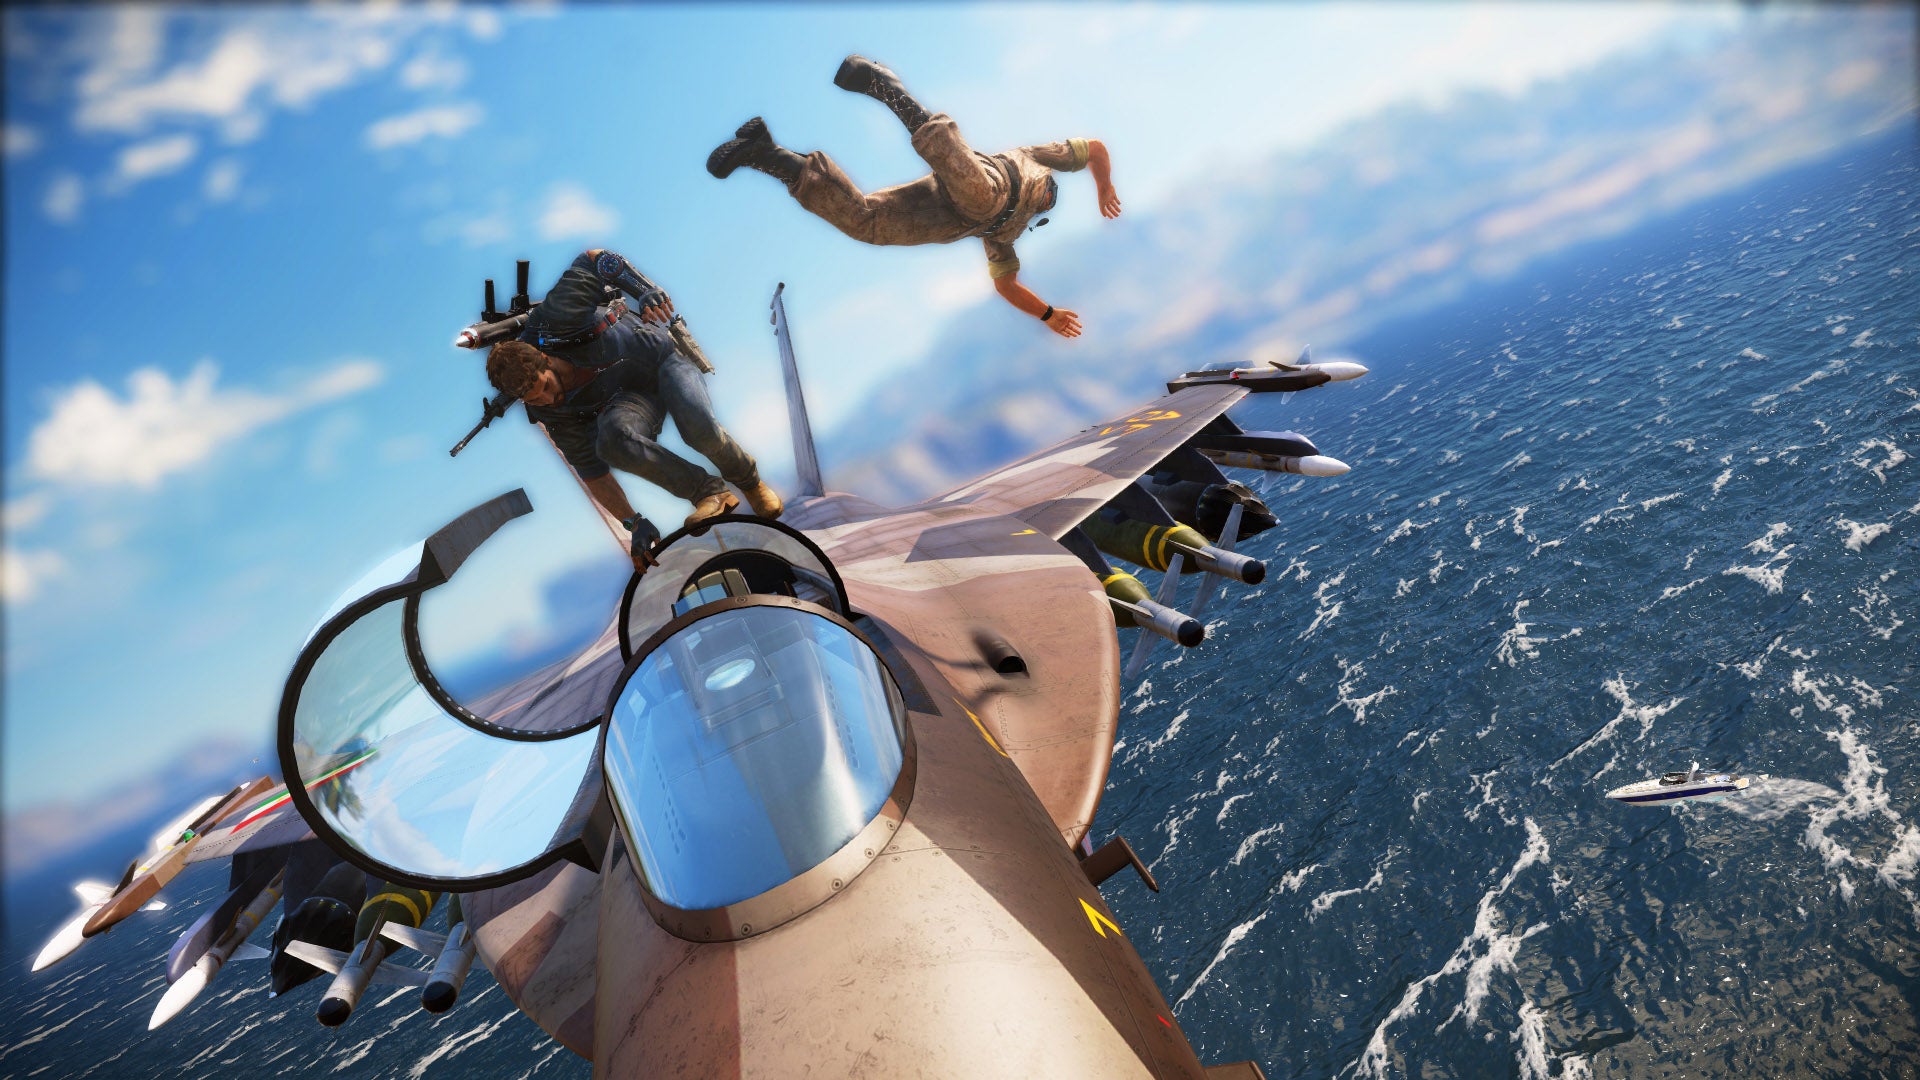 Image for Just Cause 3's exaggerated action is still damn satisfying